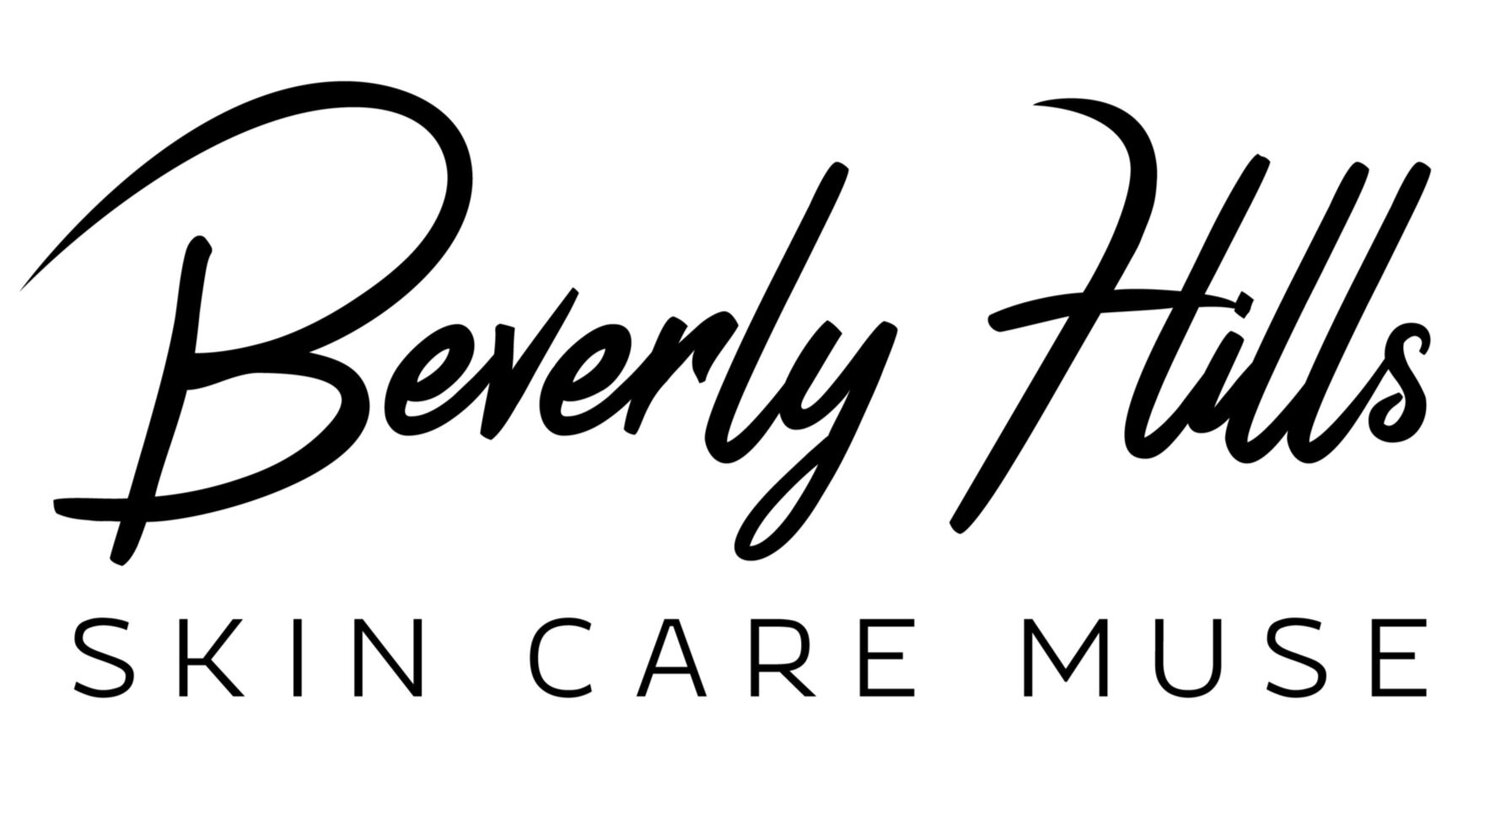 BEVERLY HILLS SKIN CARE MUSE